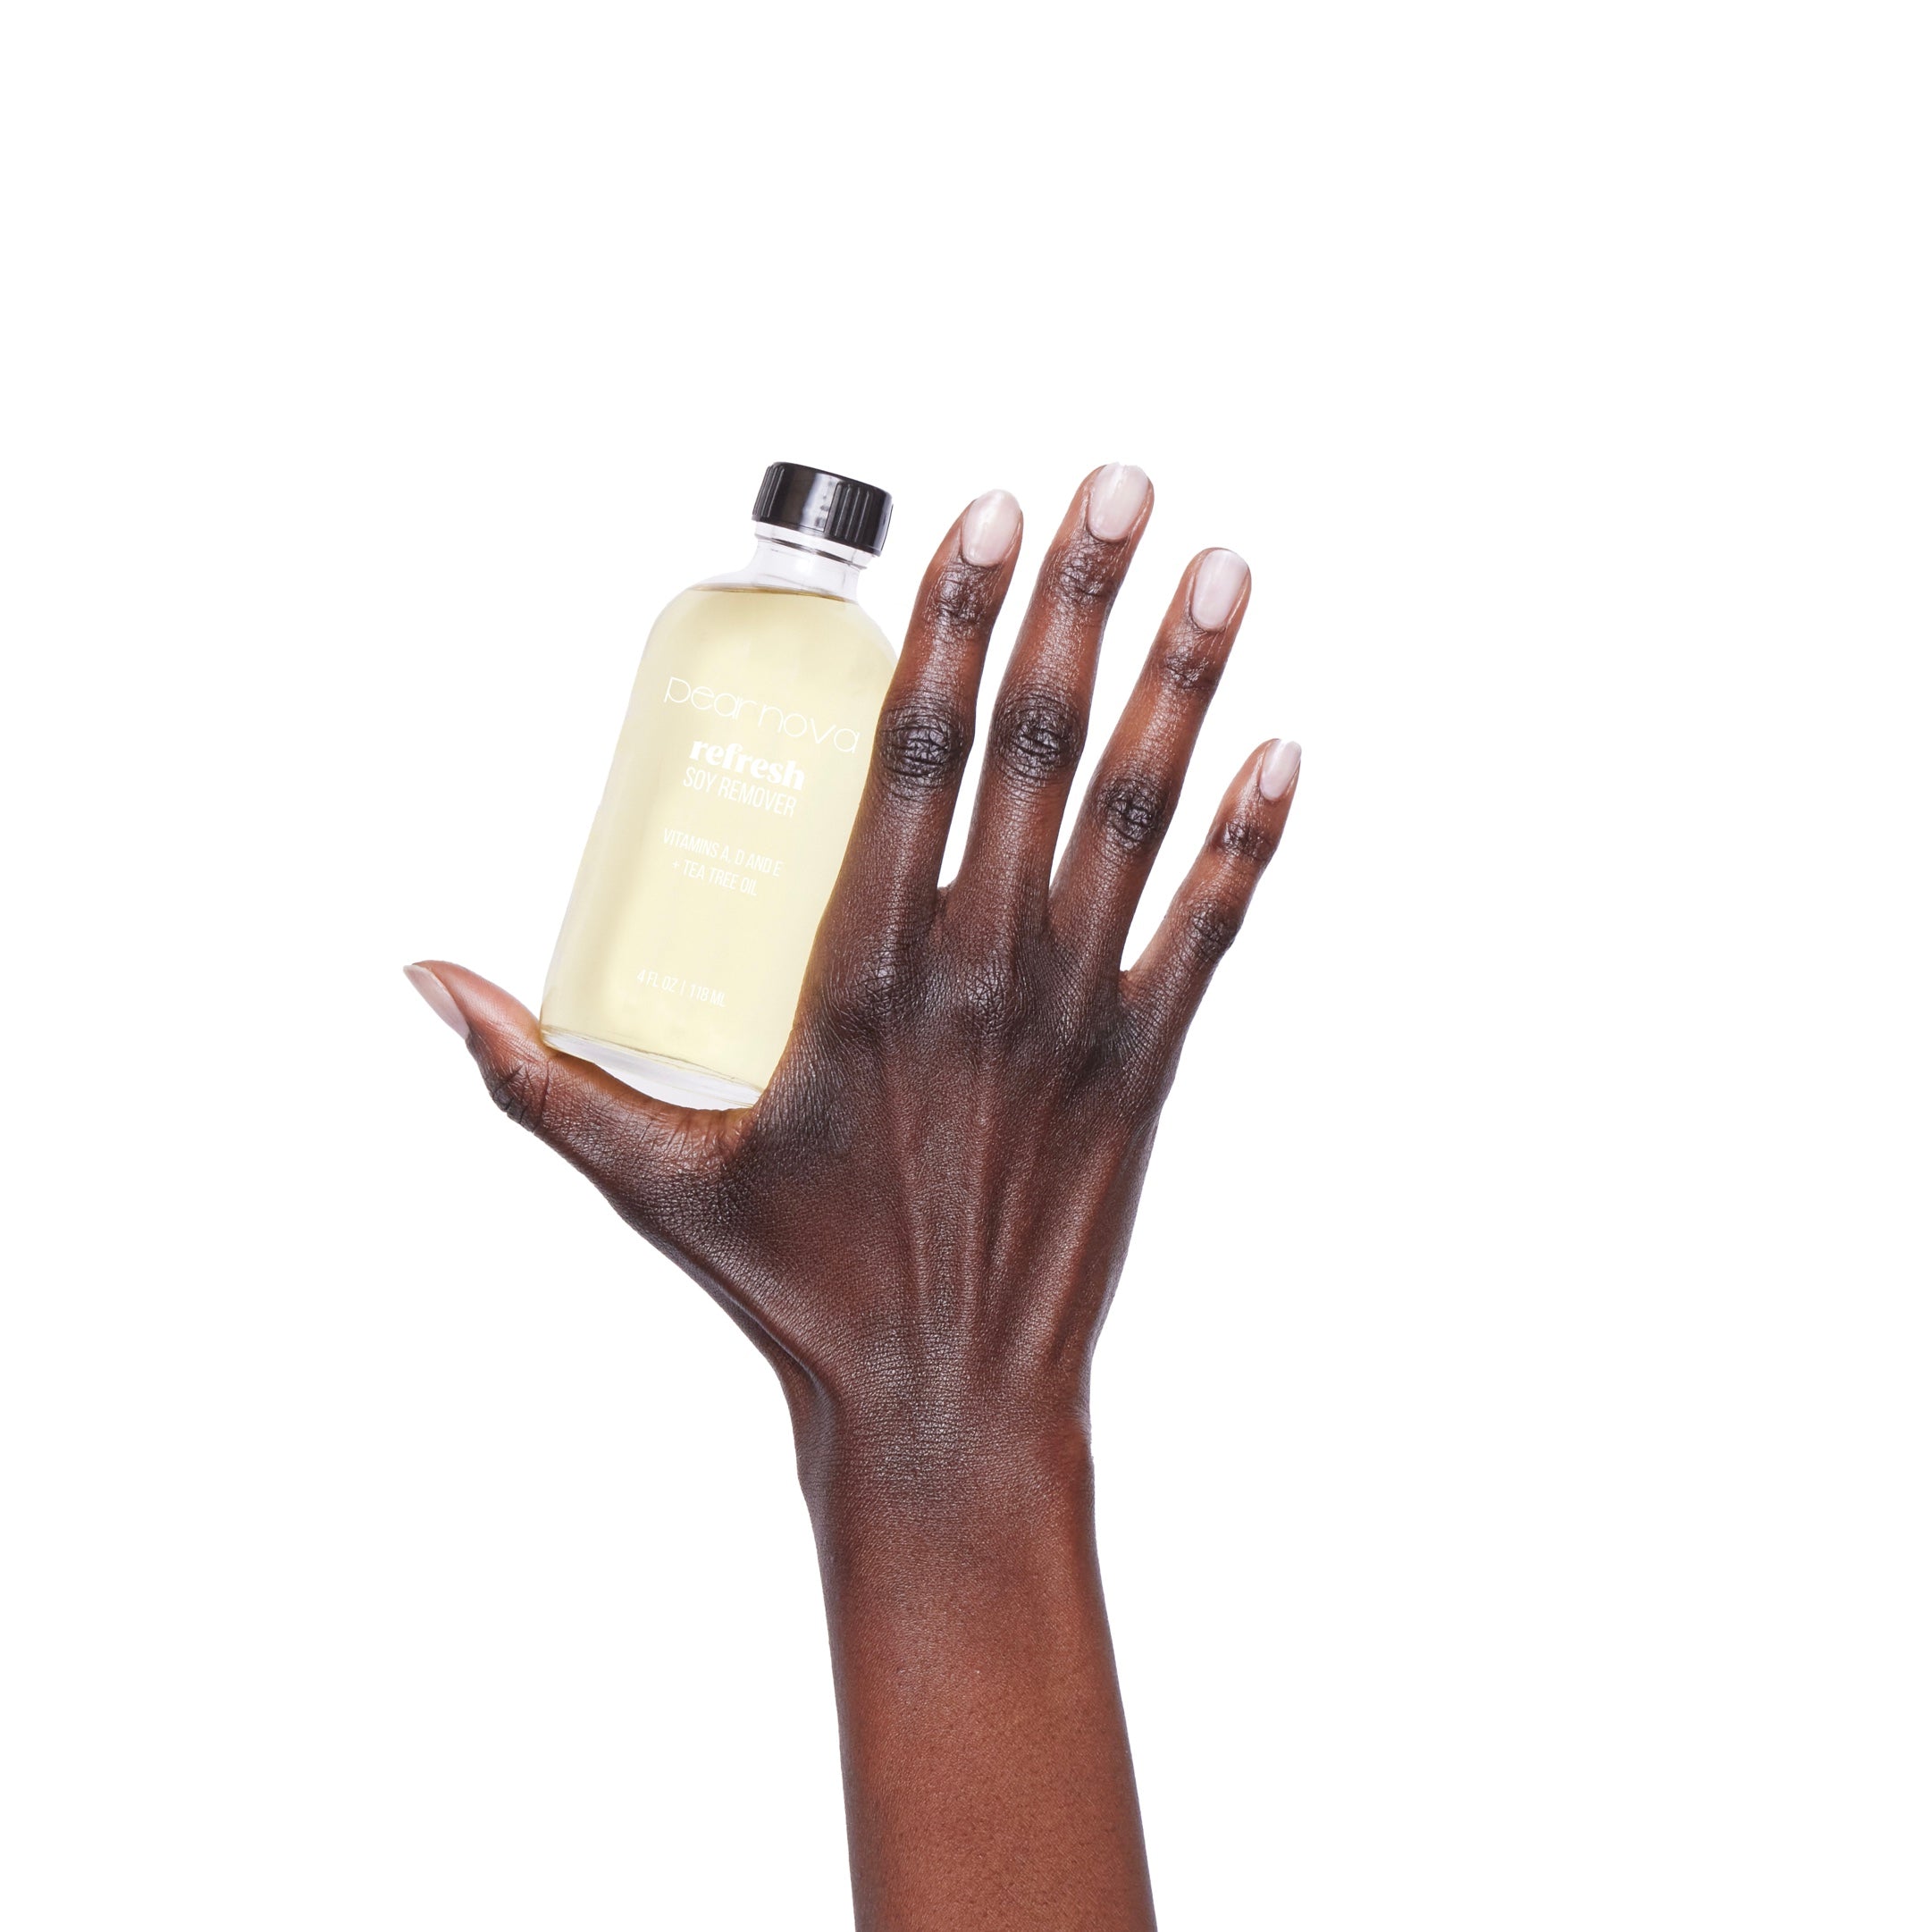 Hand model holding a bottle of Refresh Soy Nail Polish Remover